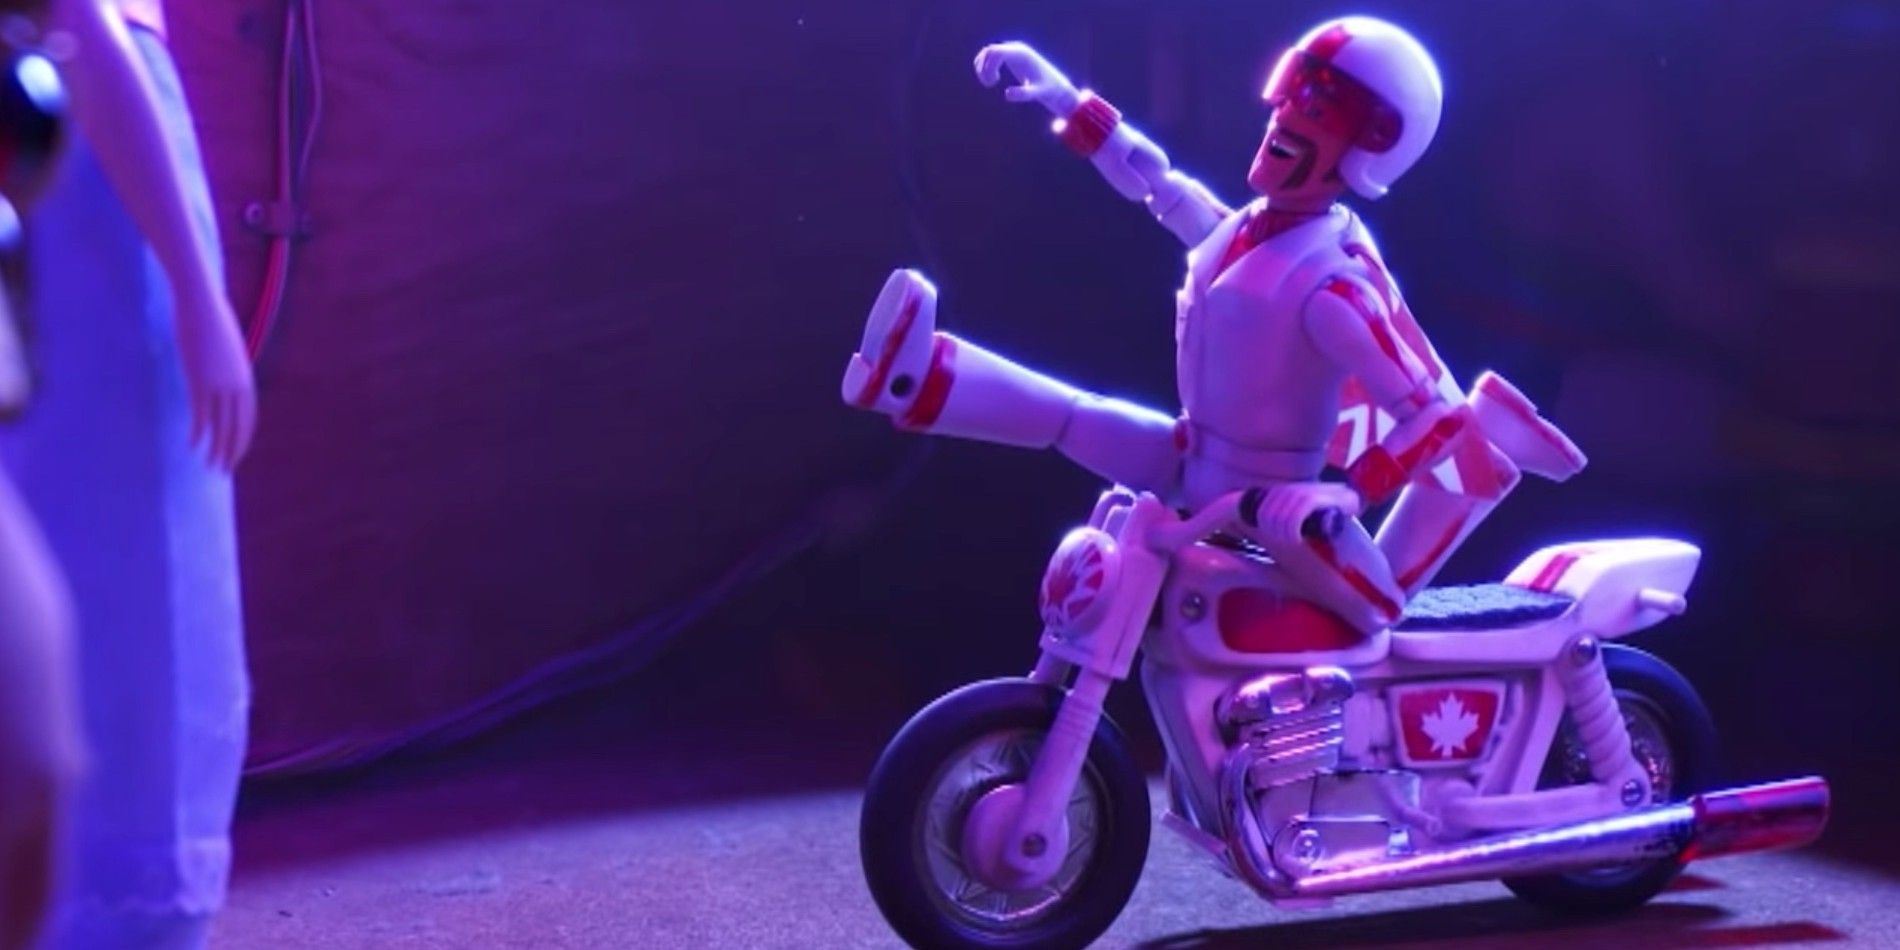 Duke Caboom performing a stunt in Toy Story 4